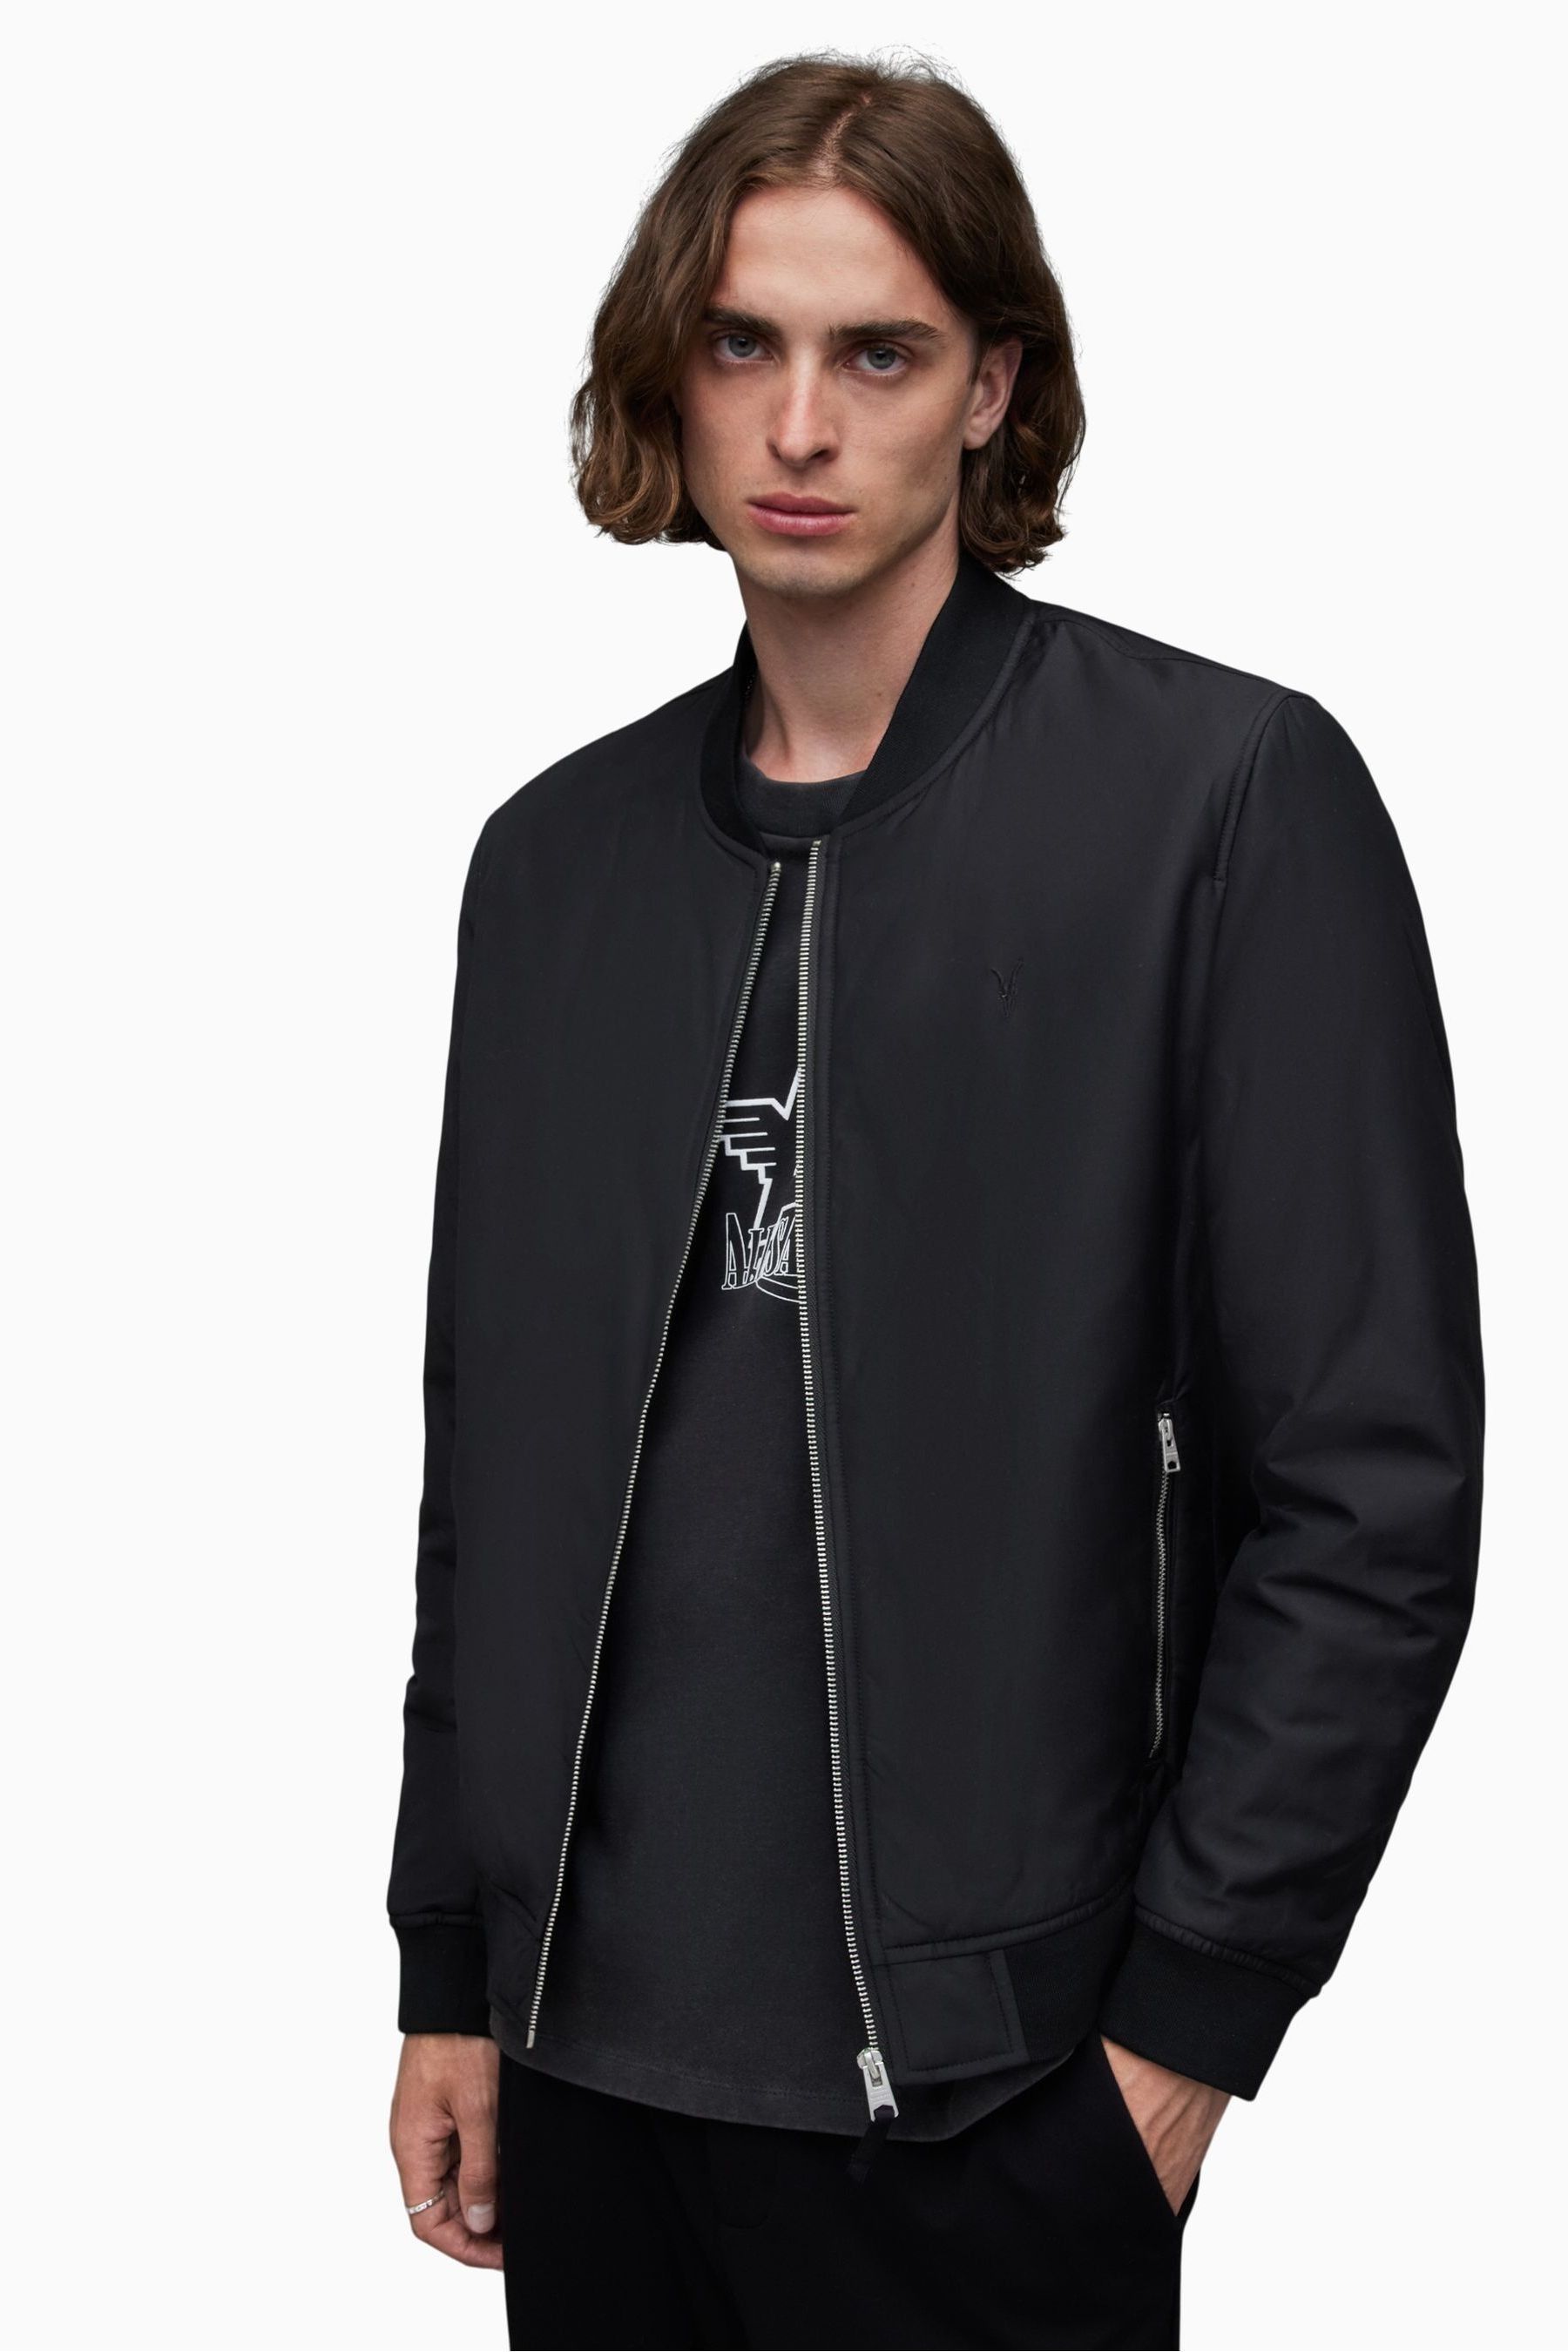 Buy AllSaints Black Withrow Bomber Jacket from the Next UK online shop